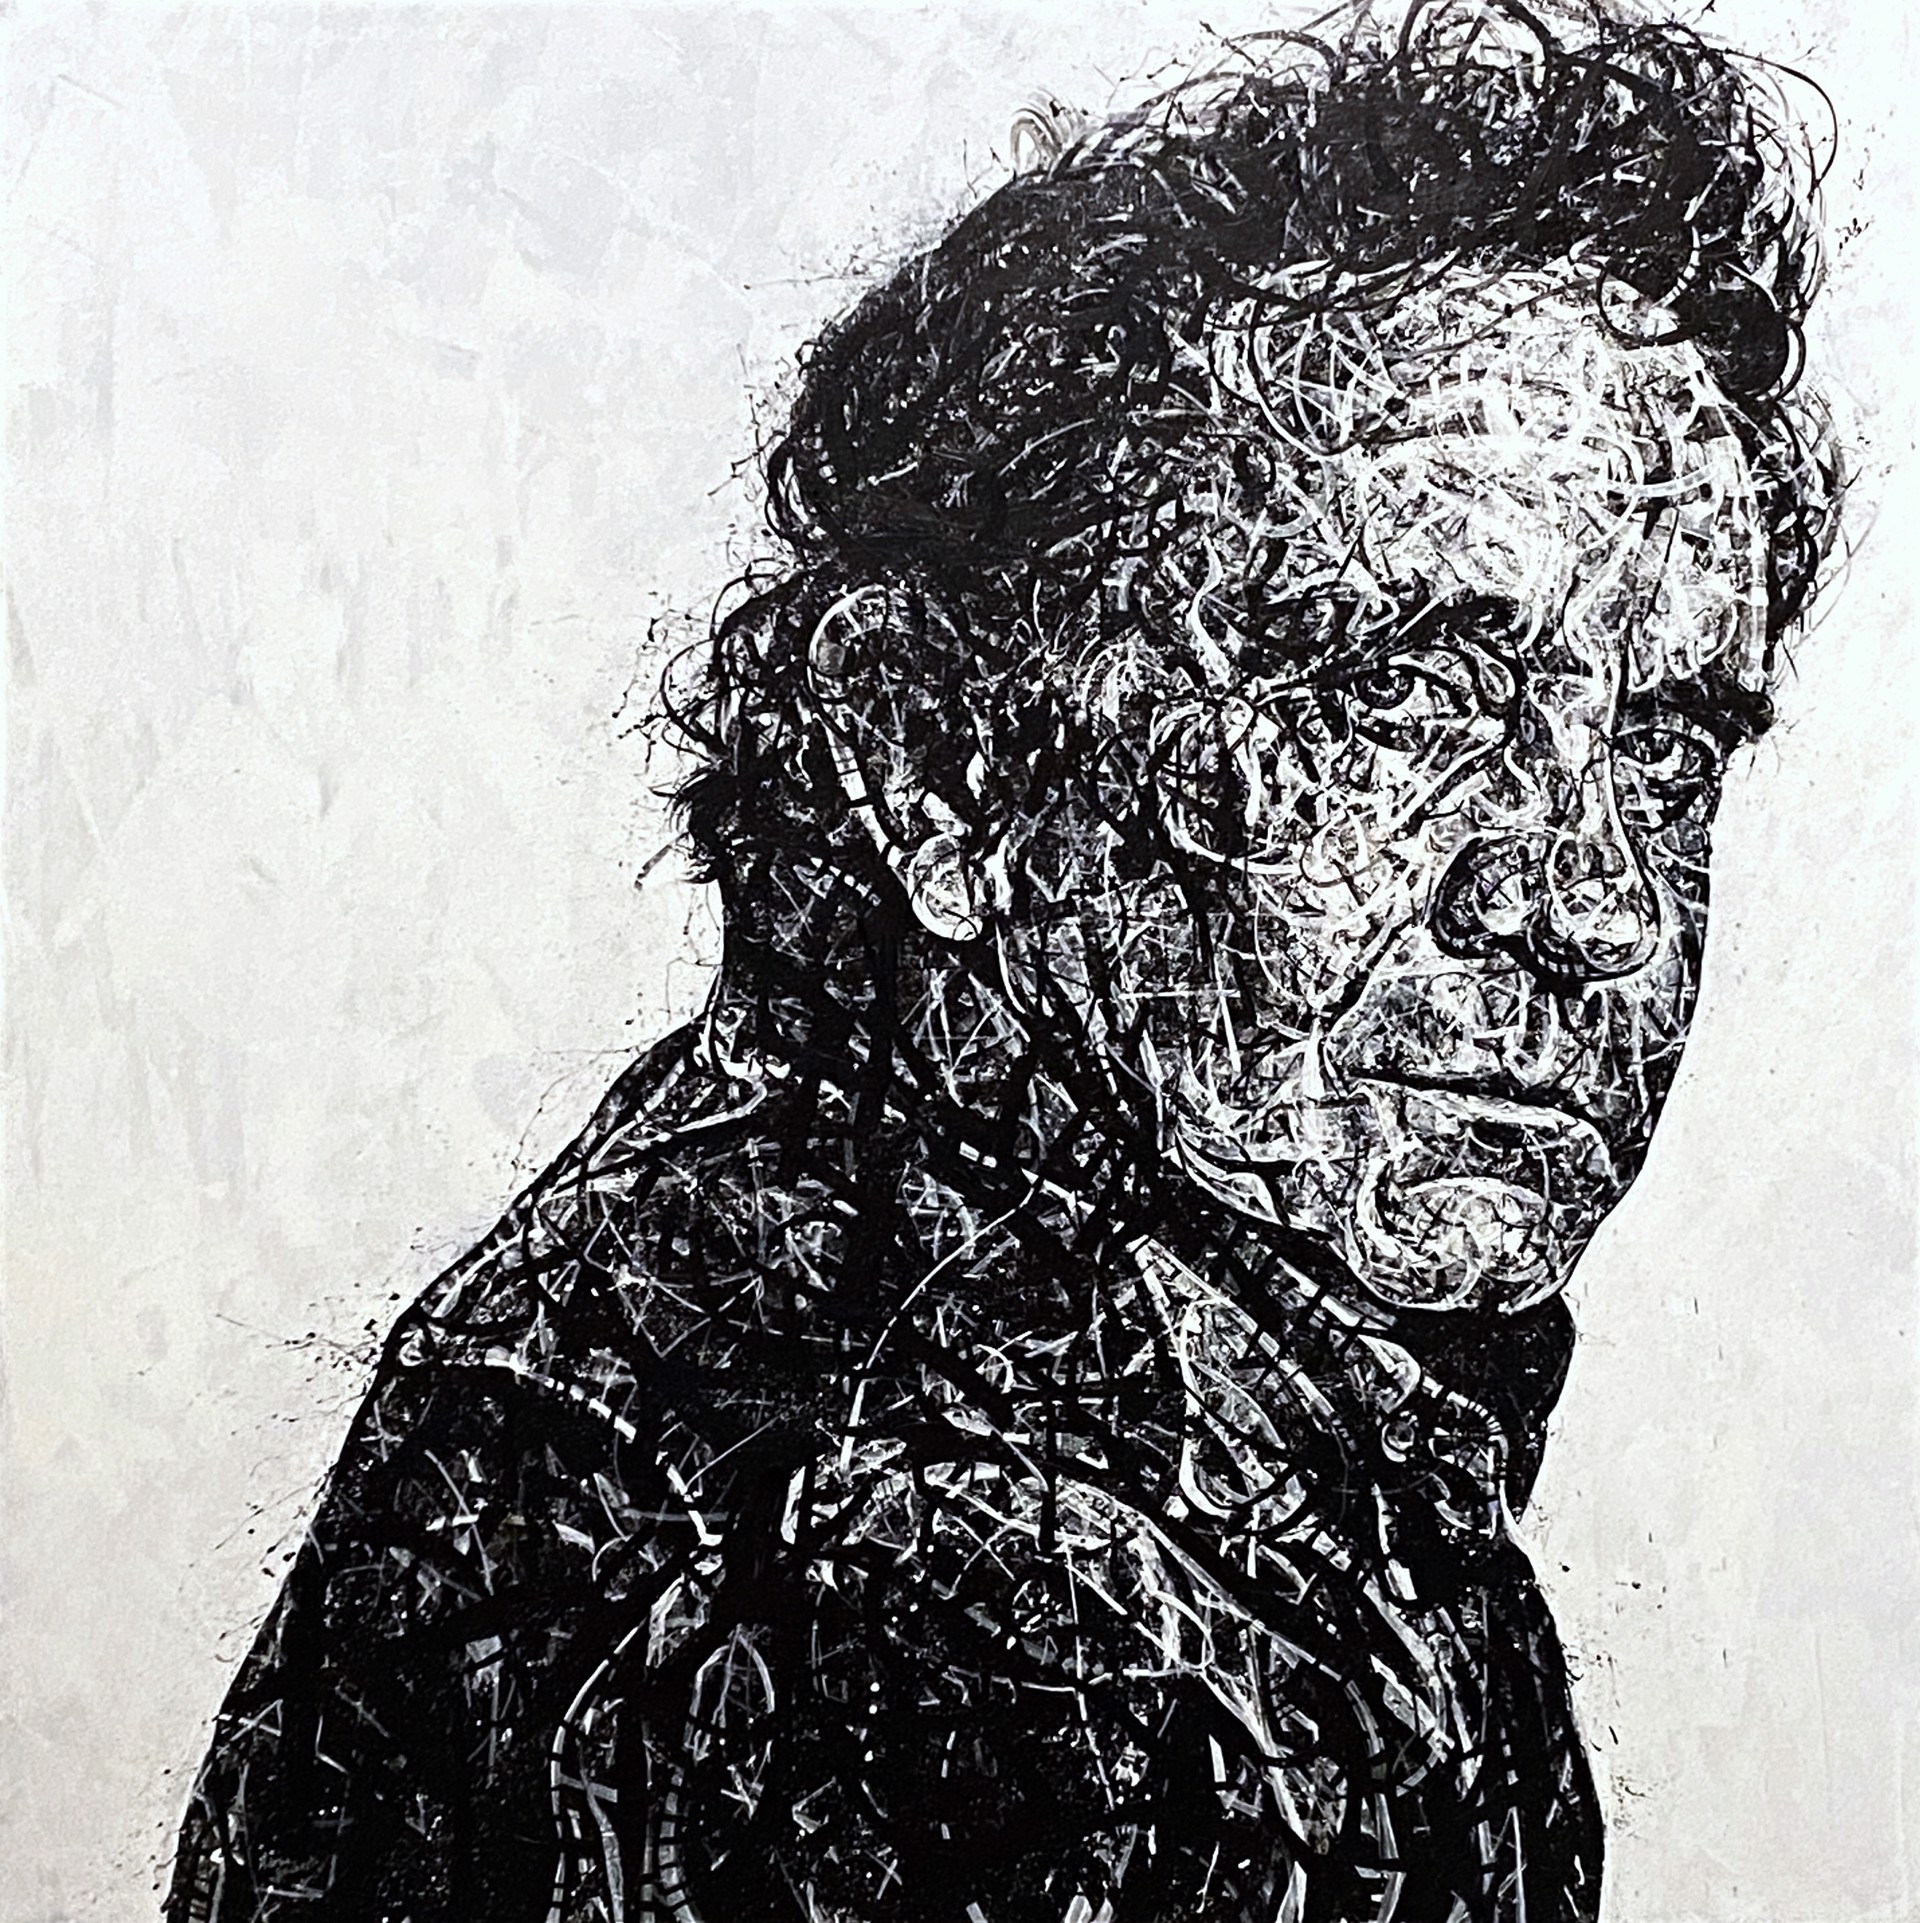 A Thousand Songs - Johnny Cash by Aaron Reichert